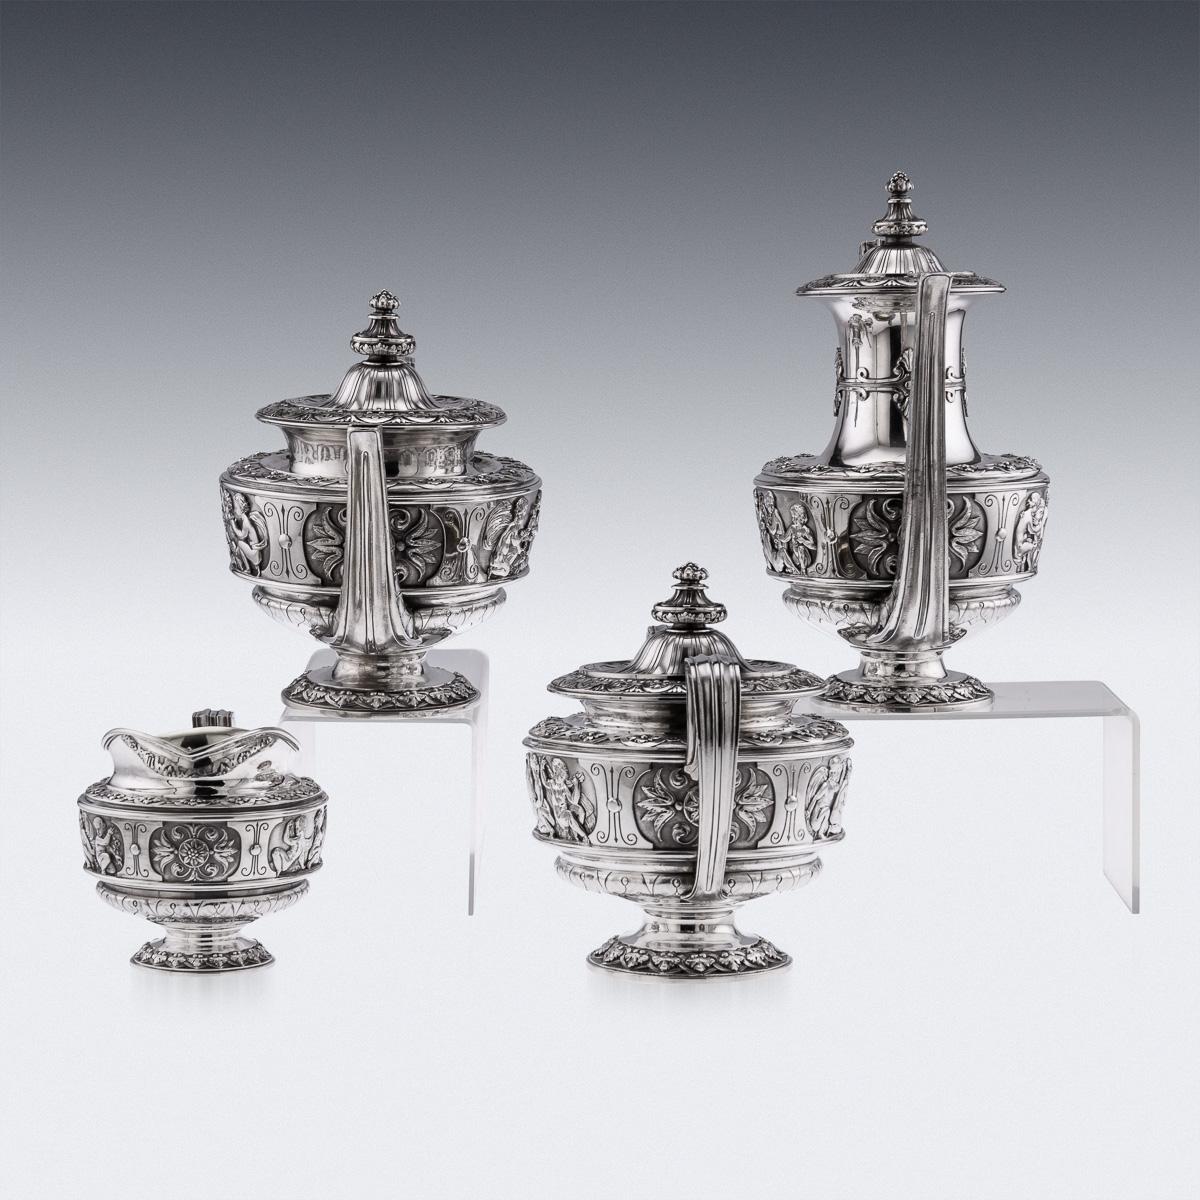 19th Century French Solid Silver Tea Service on Tray, Odiot, Paris, c.1860 2